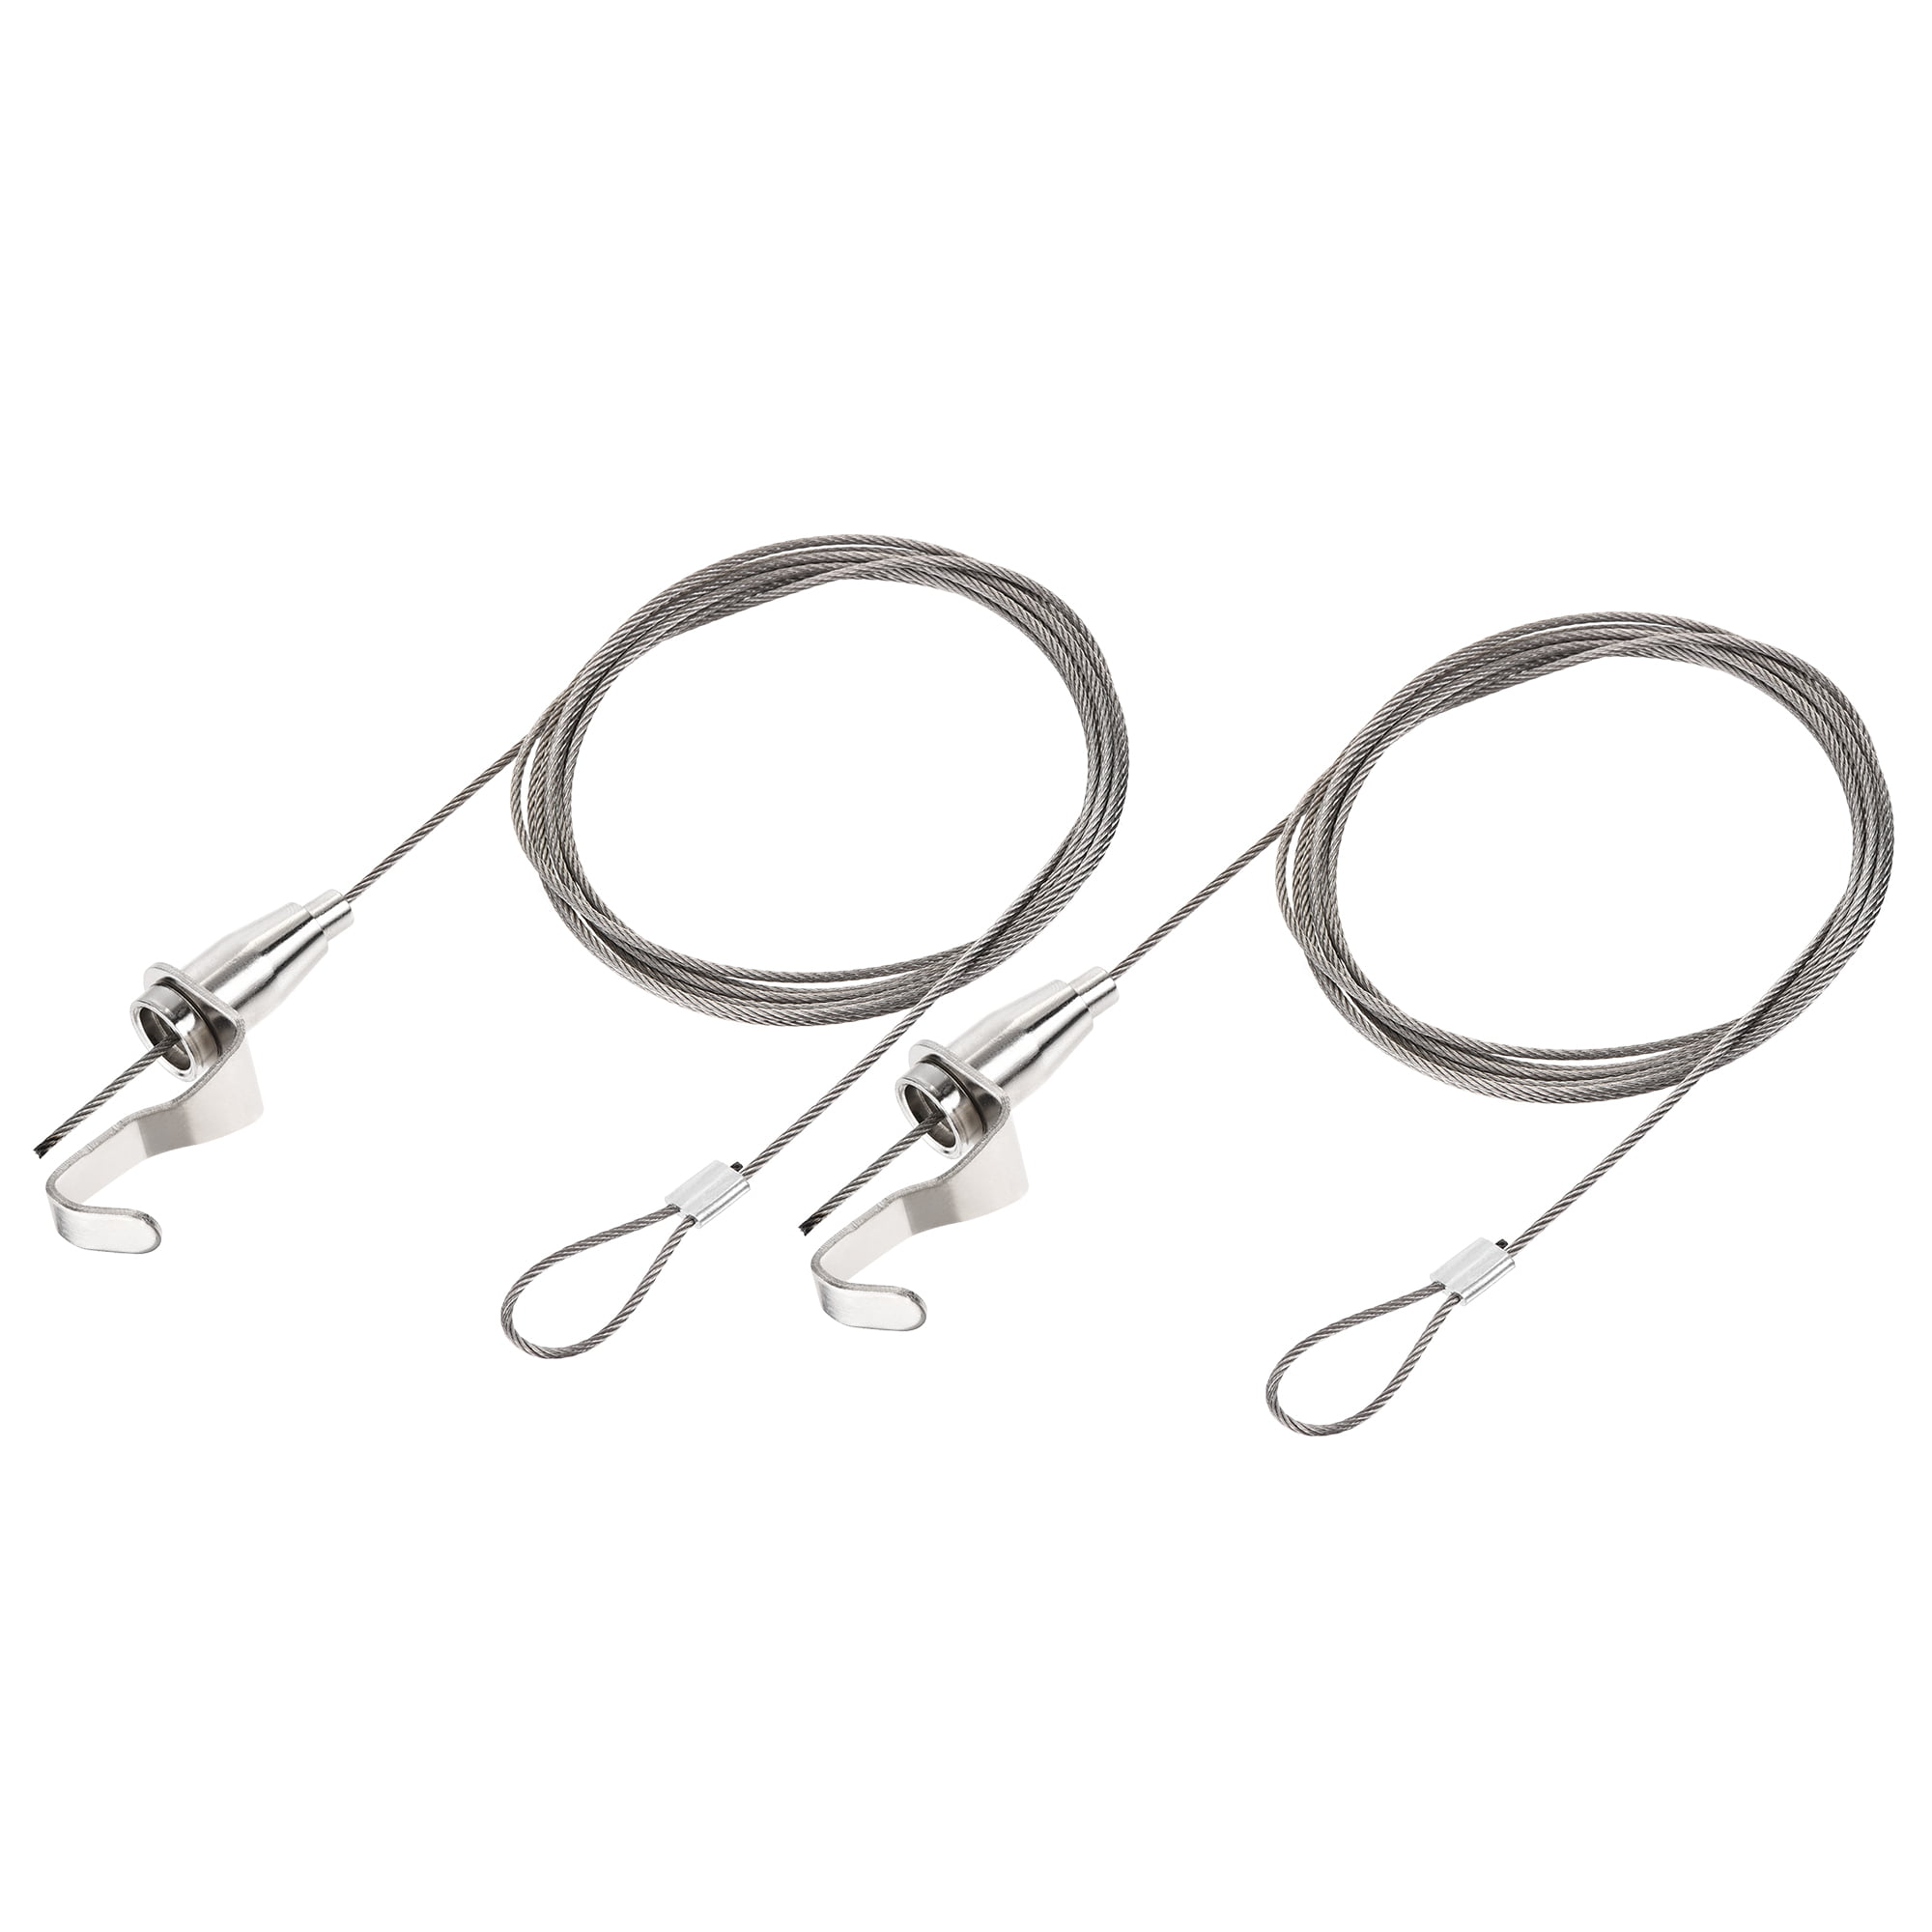 Uxcell Adjustable Picture Hanging Wire Kit 2M Electroplating Load 66lbs  2Pack 